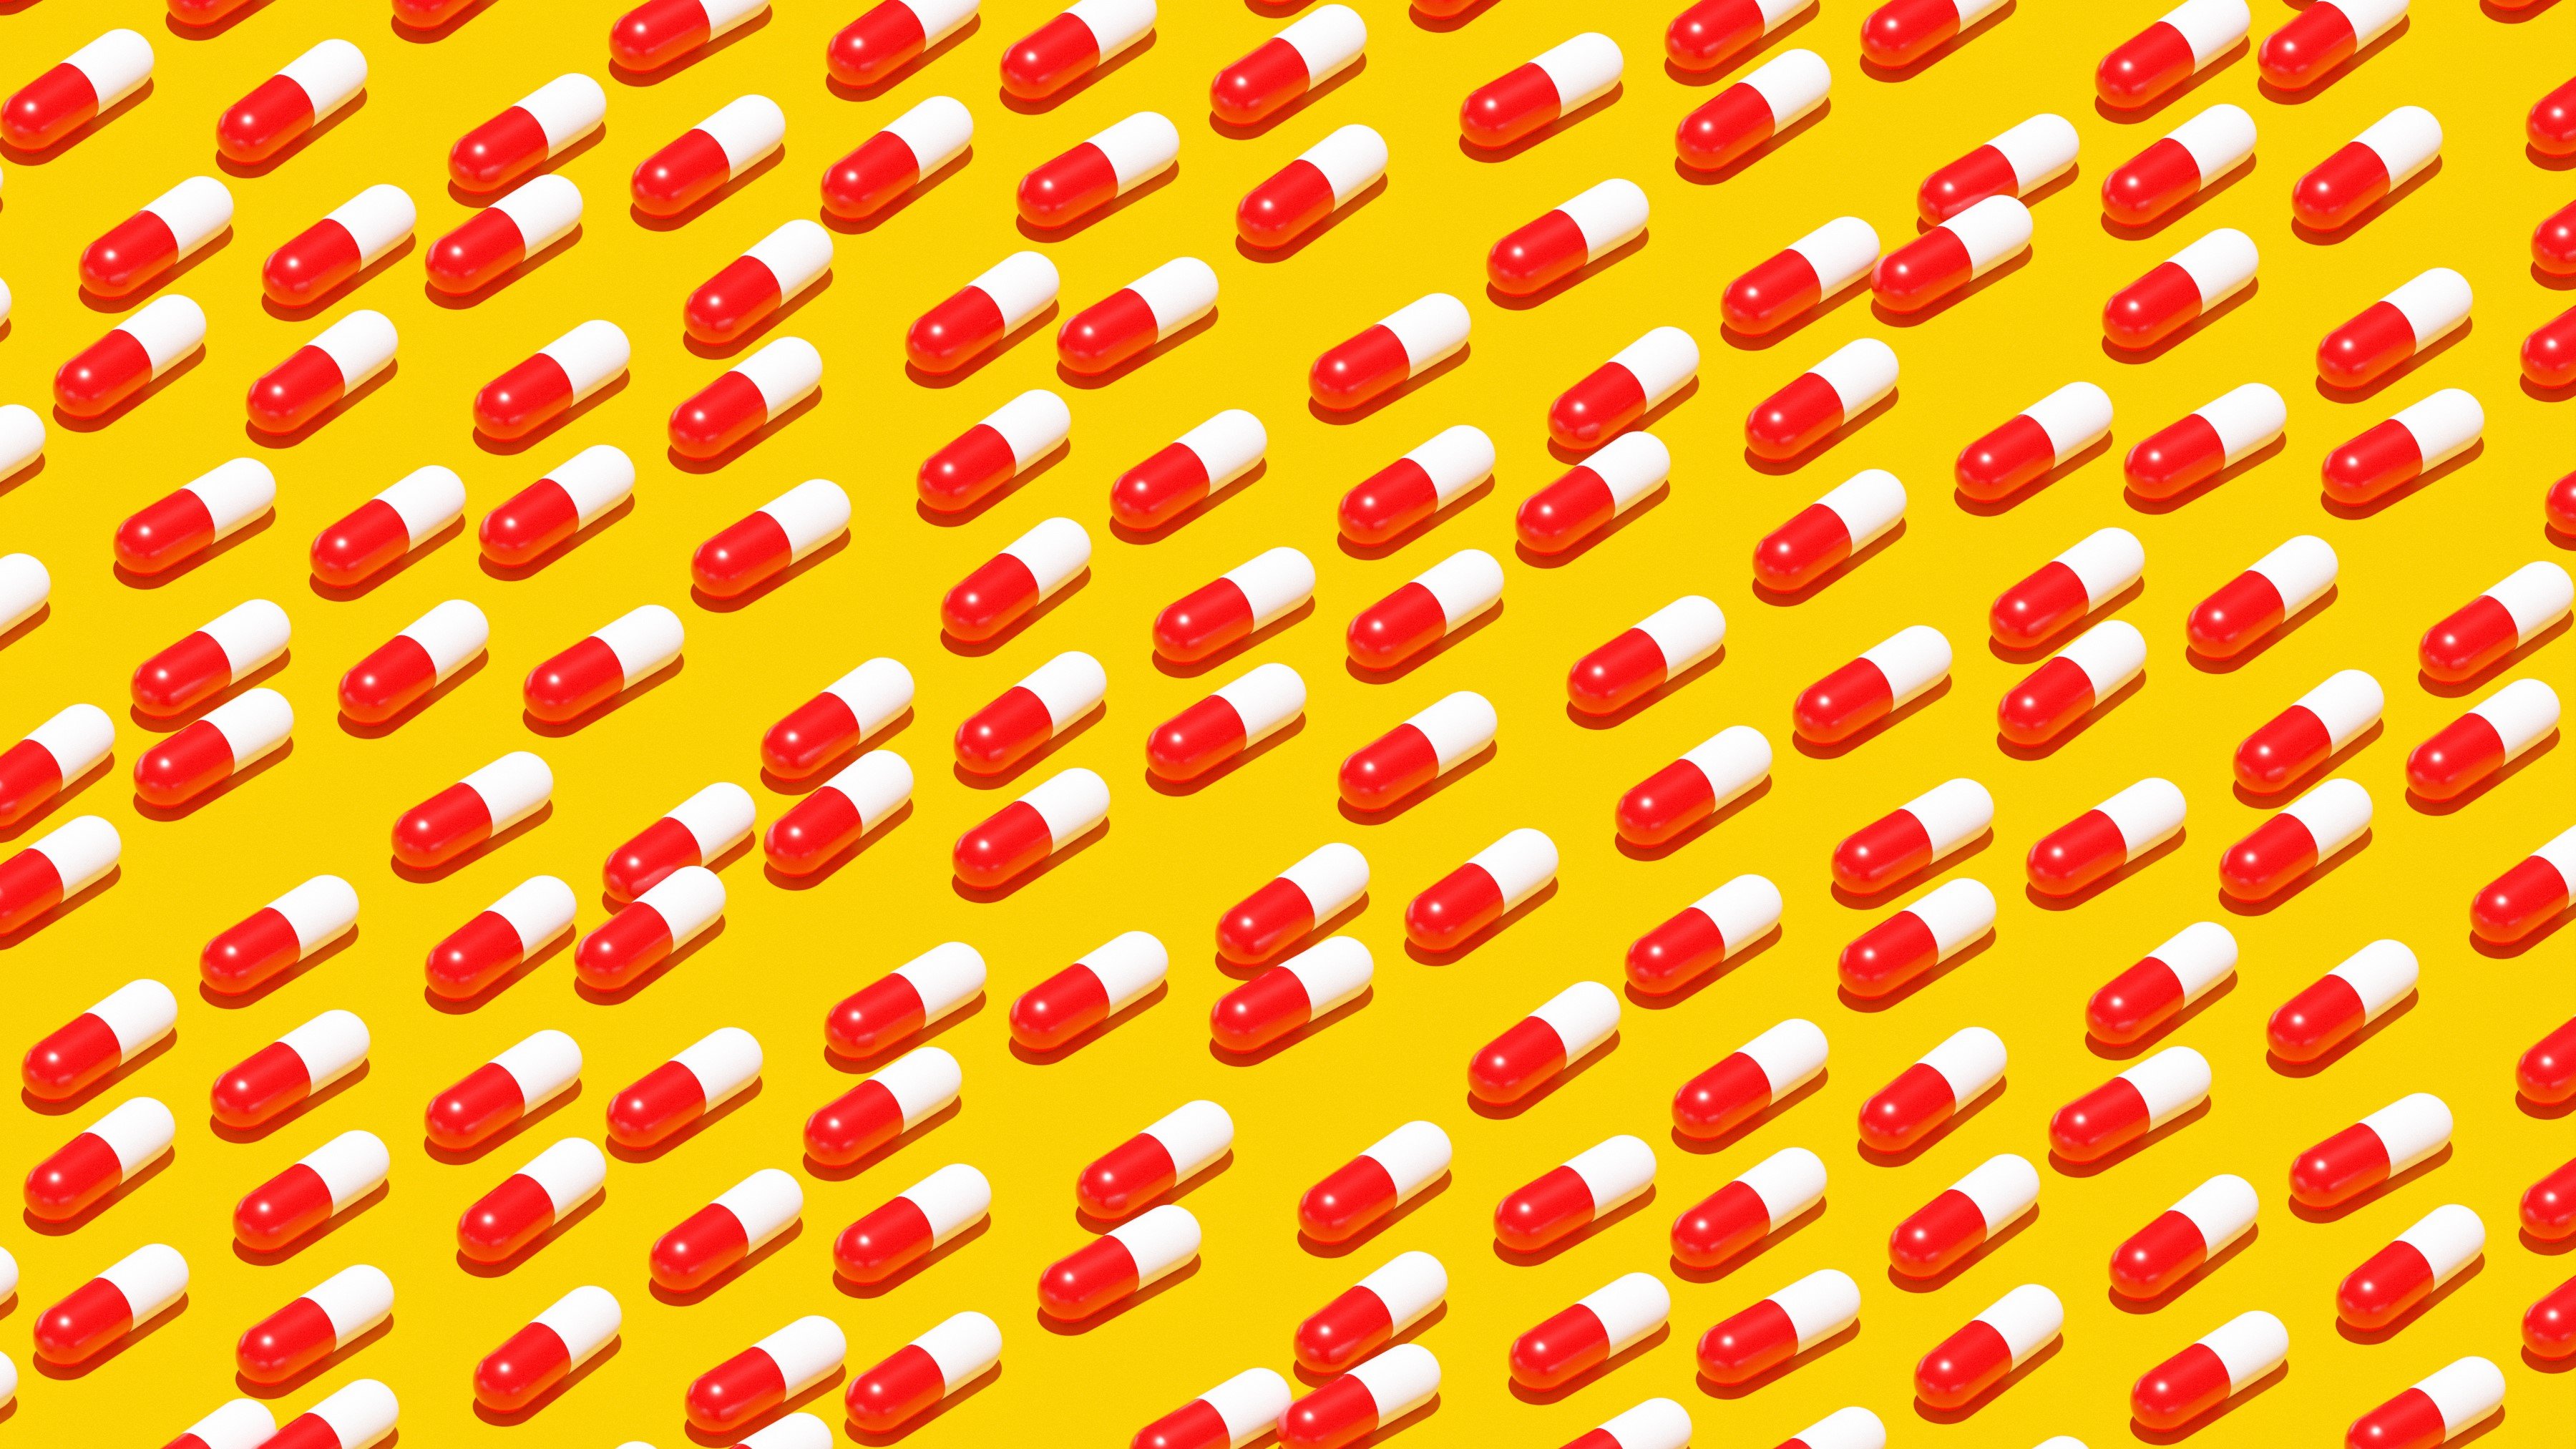 Graphic images of red and white pill capsules lined up diagonally in front of a yellow background